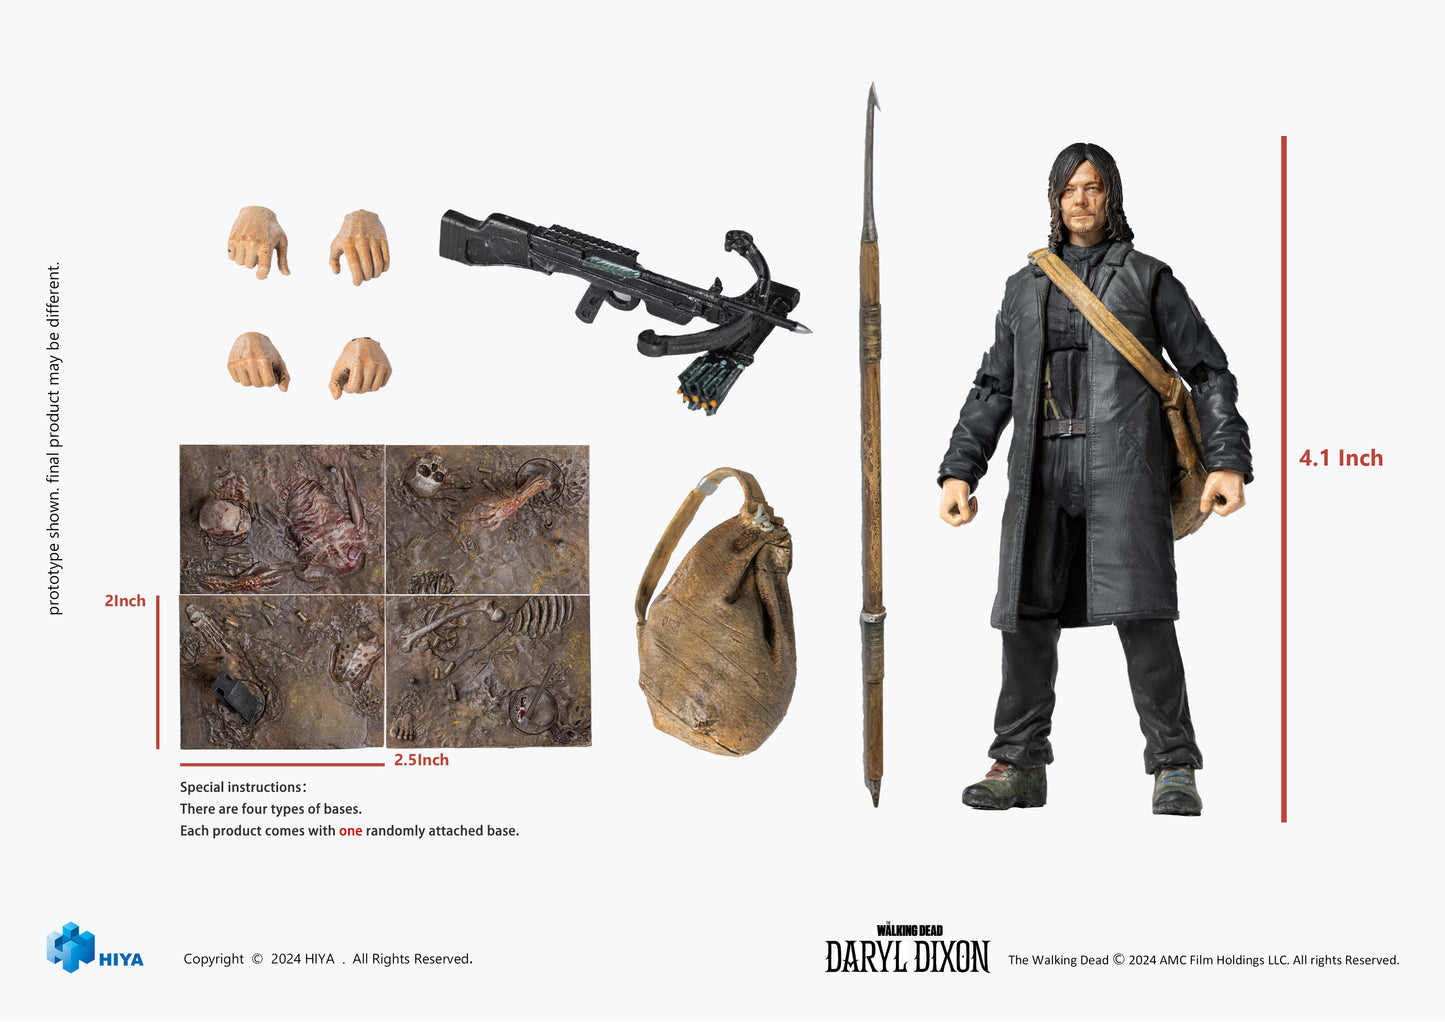 THE WALKING DEAD: DARYL DIXON Daryl  1/18 Scale - Action Figure By HIYA Toys